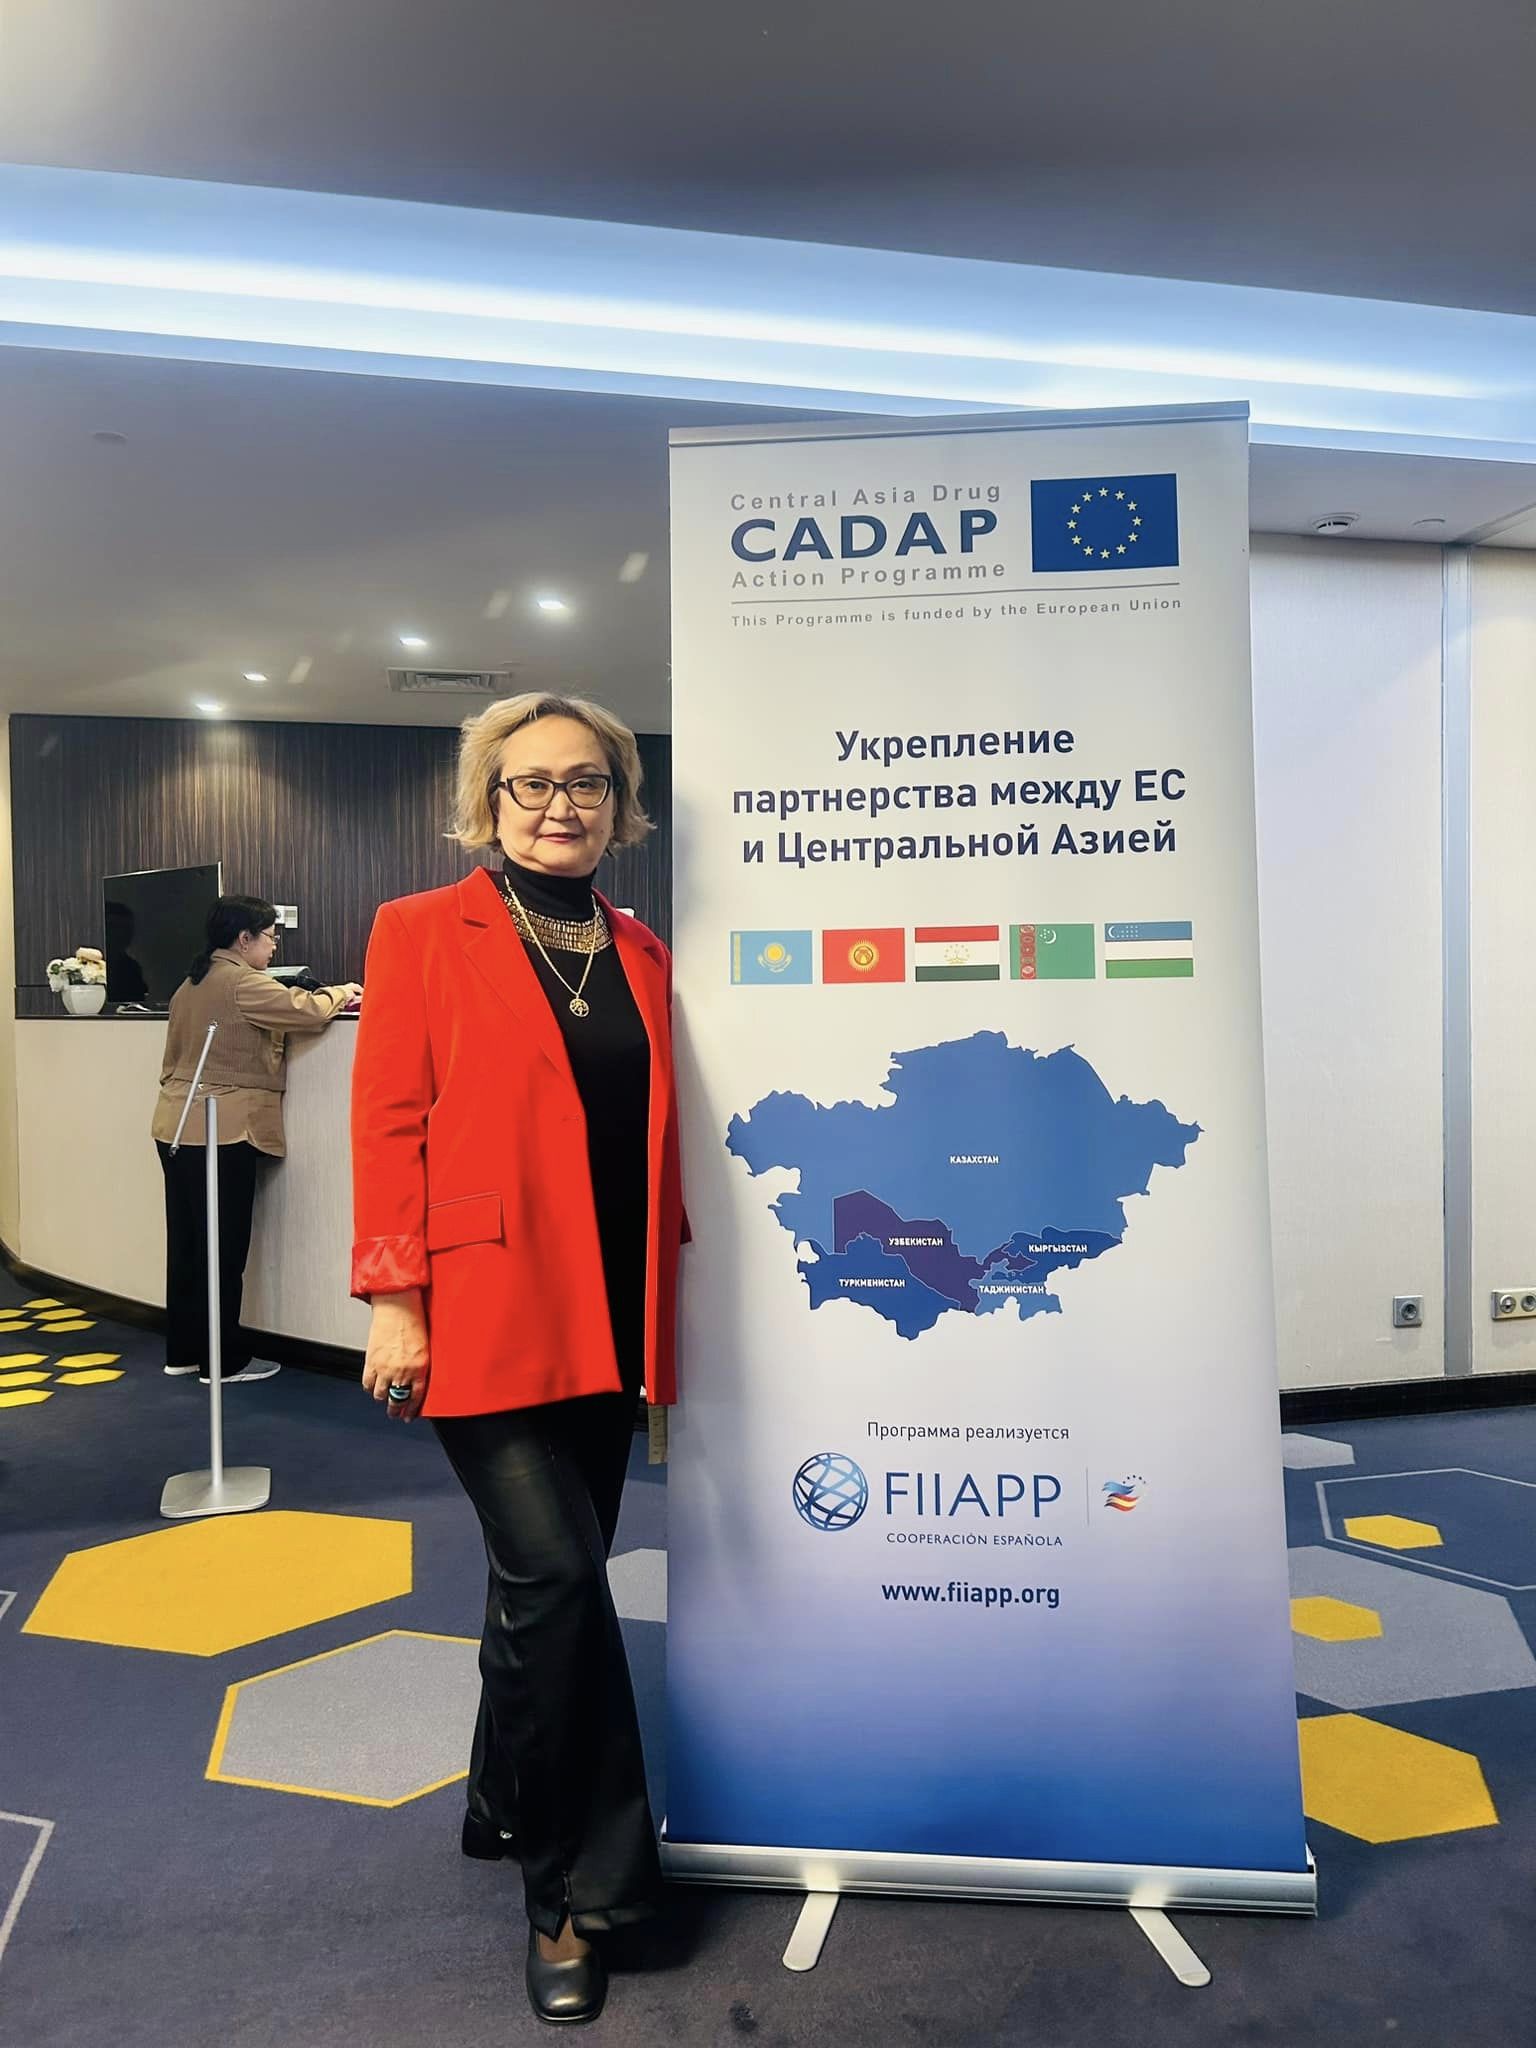 A workshop organized by CADAP (Central Asia Drug Action Program) 